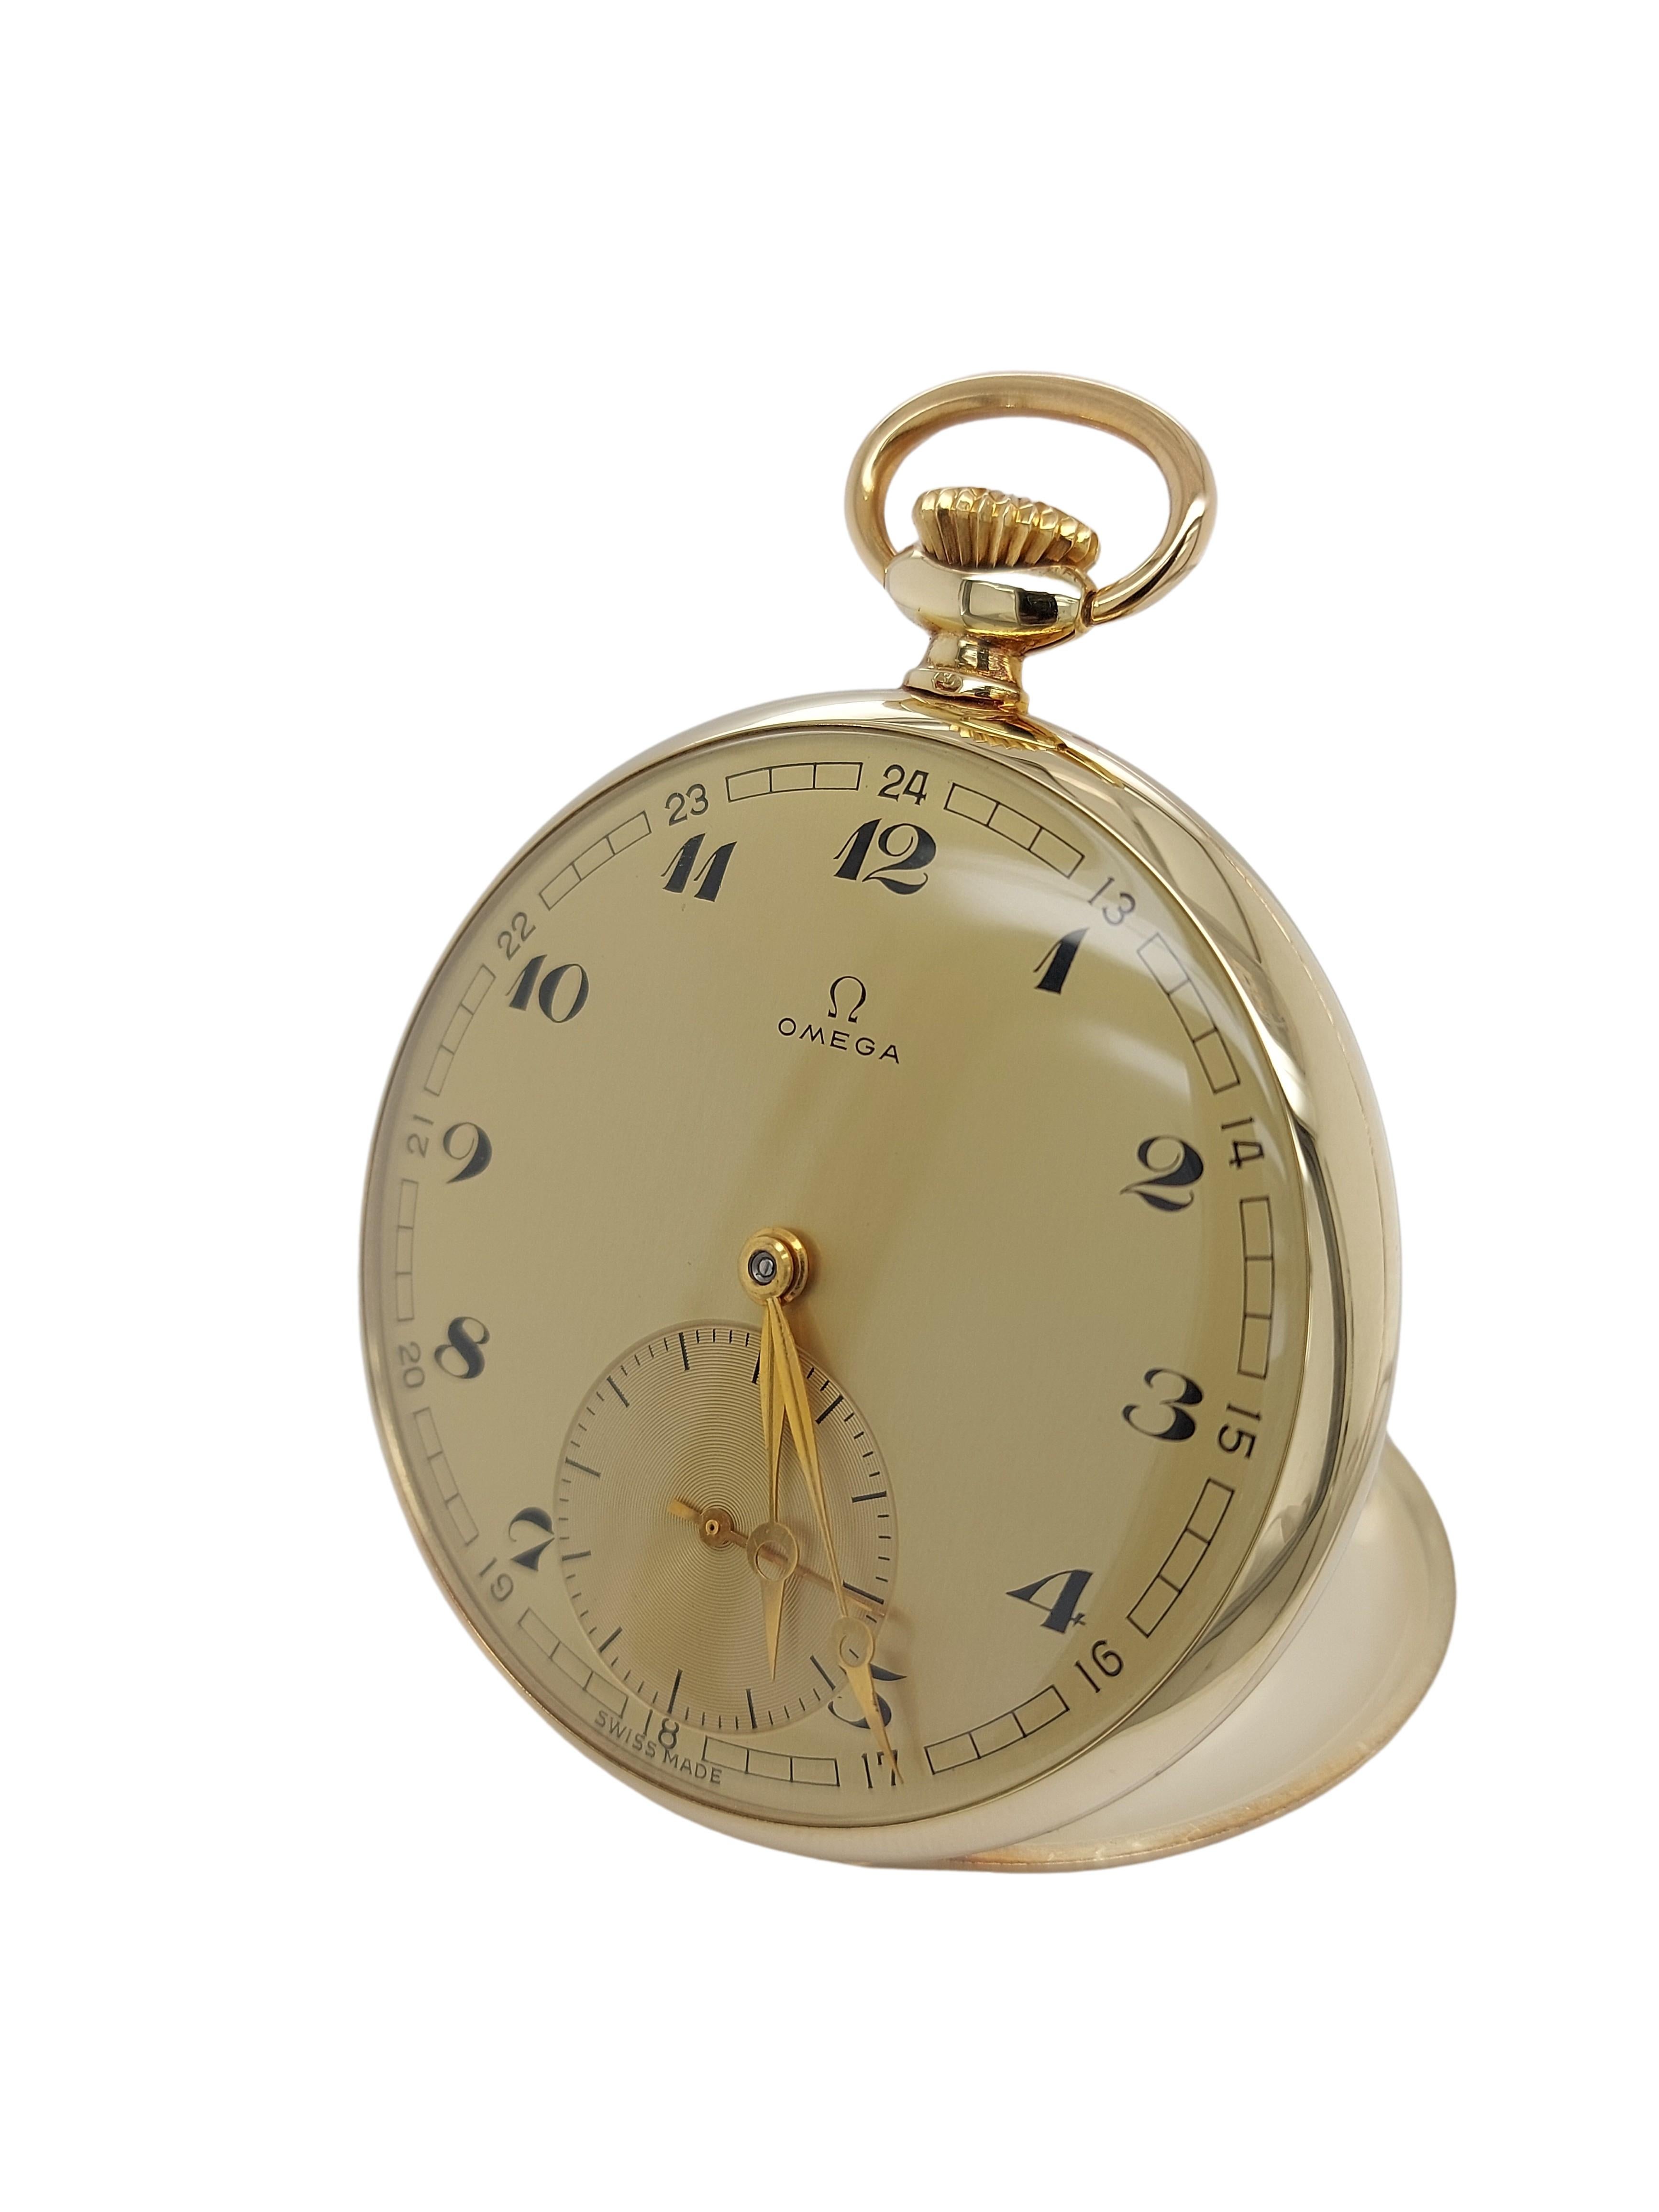 Artisan Excellent Condition 14kt Yellow Gold Omega Pocket Watch, Calibre 163, Gold Dial For Sale